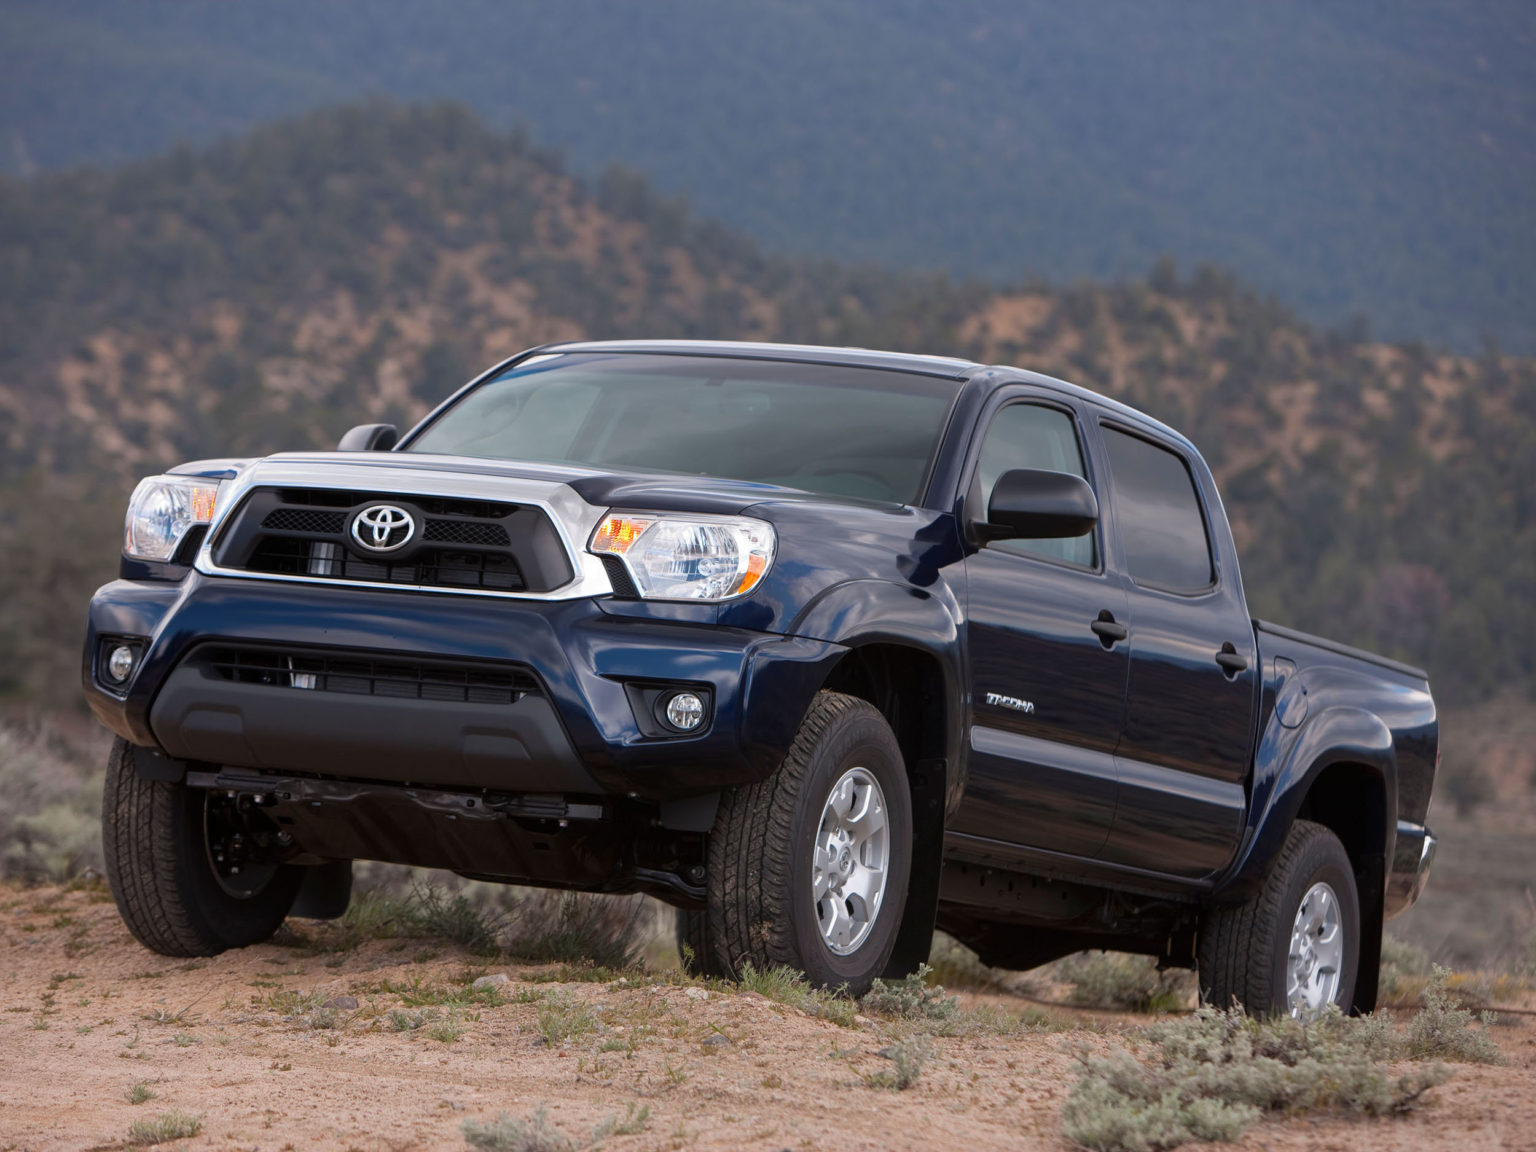 The Toyota Tacoma is generally regarded as a competent truck, both on- and off-road.